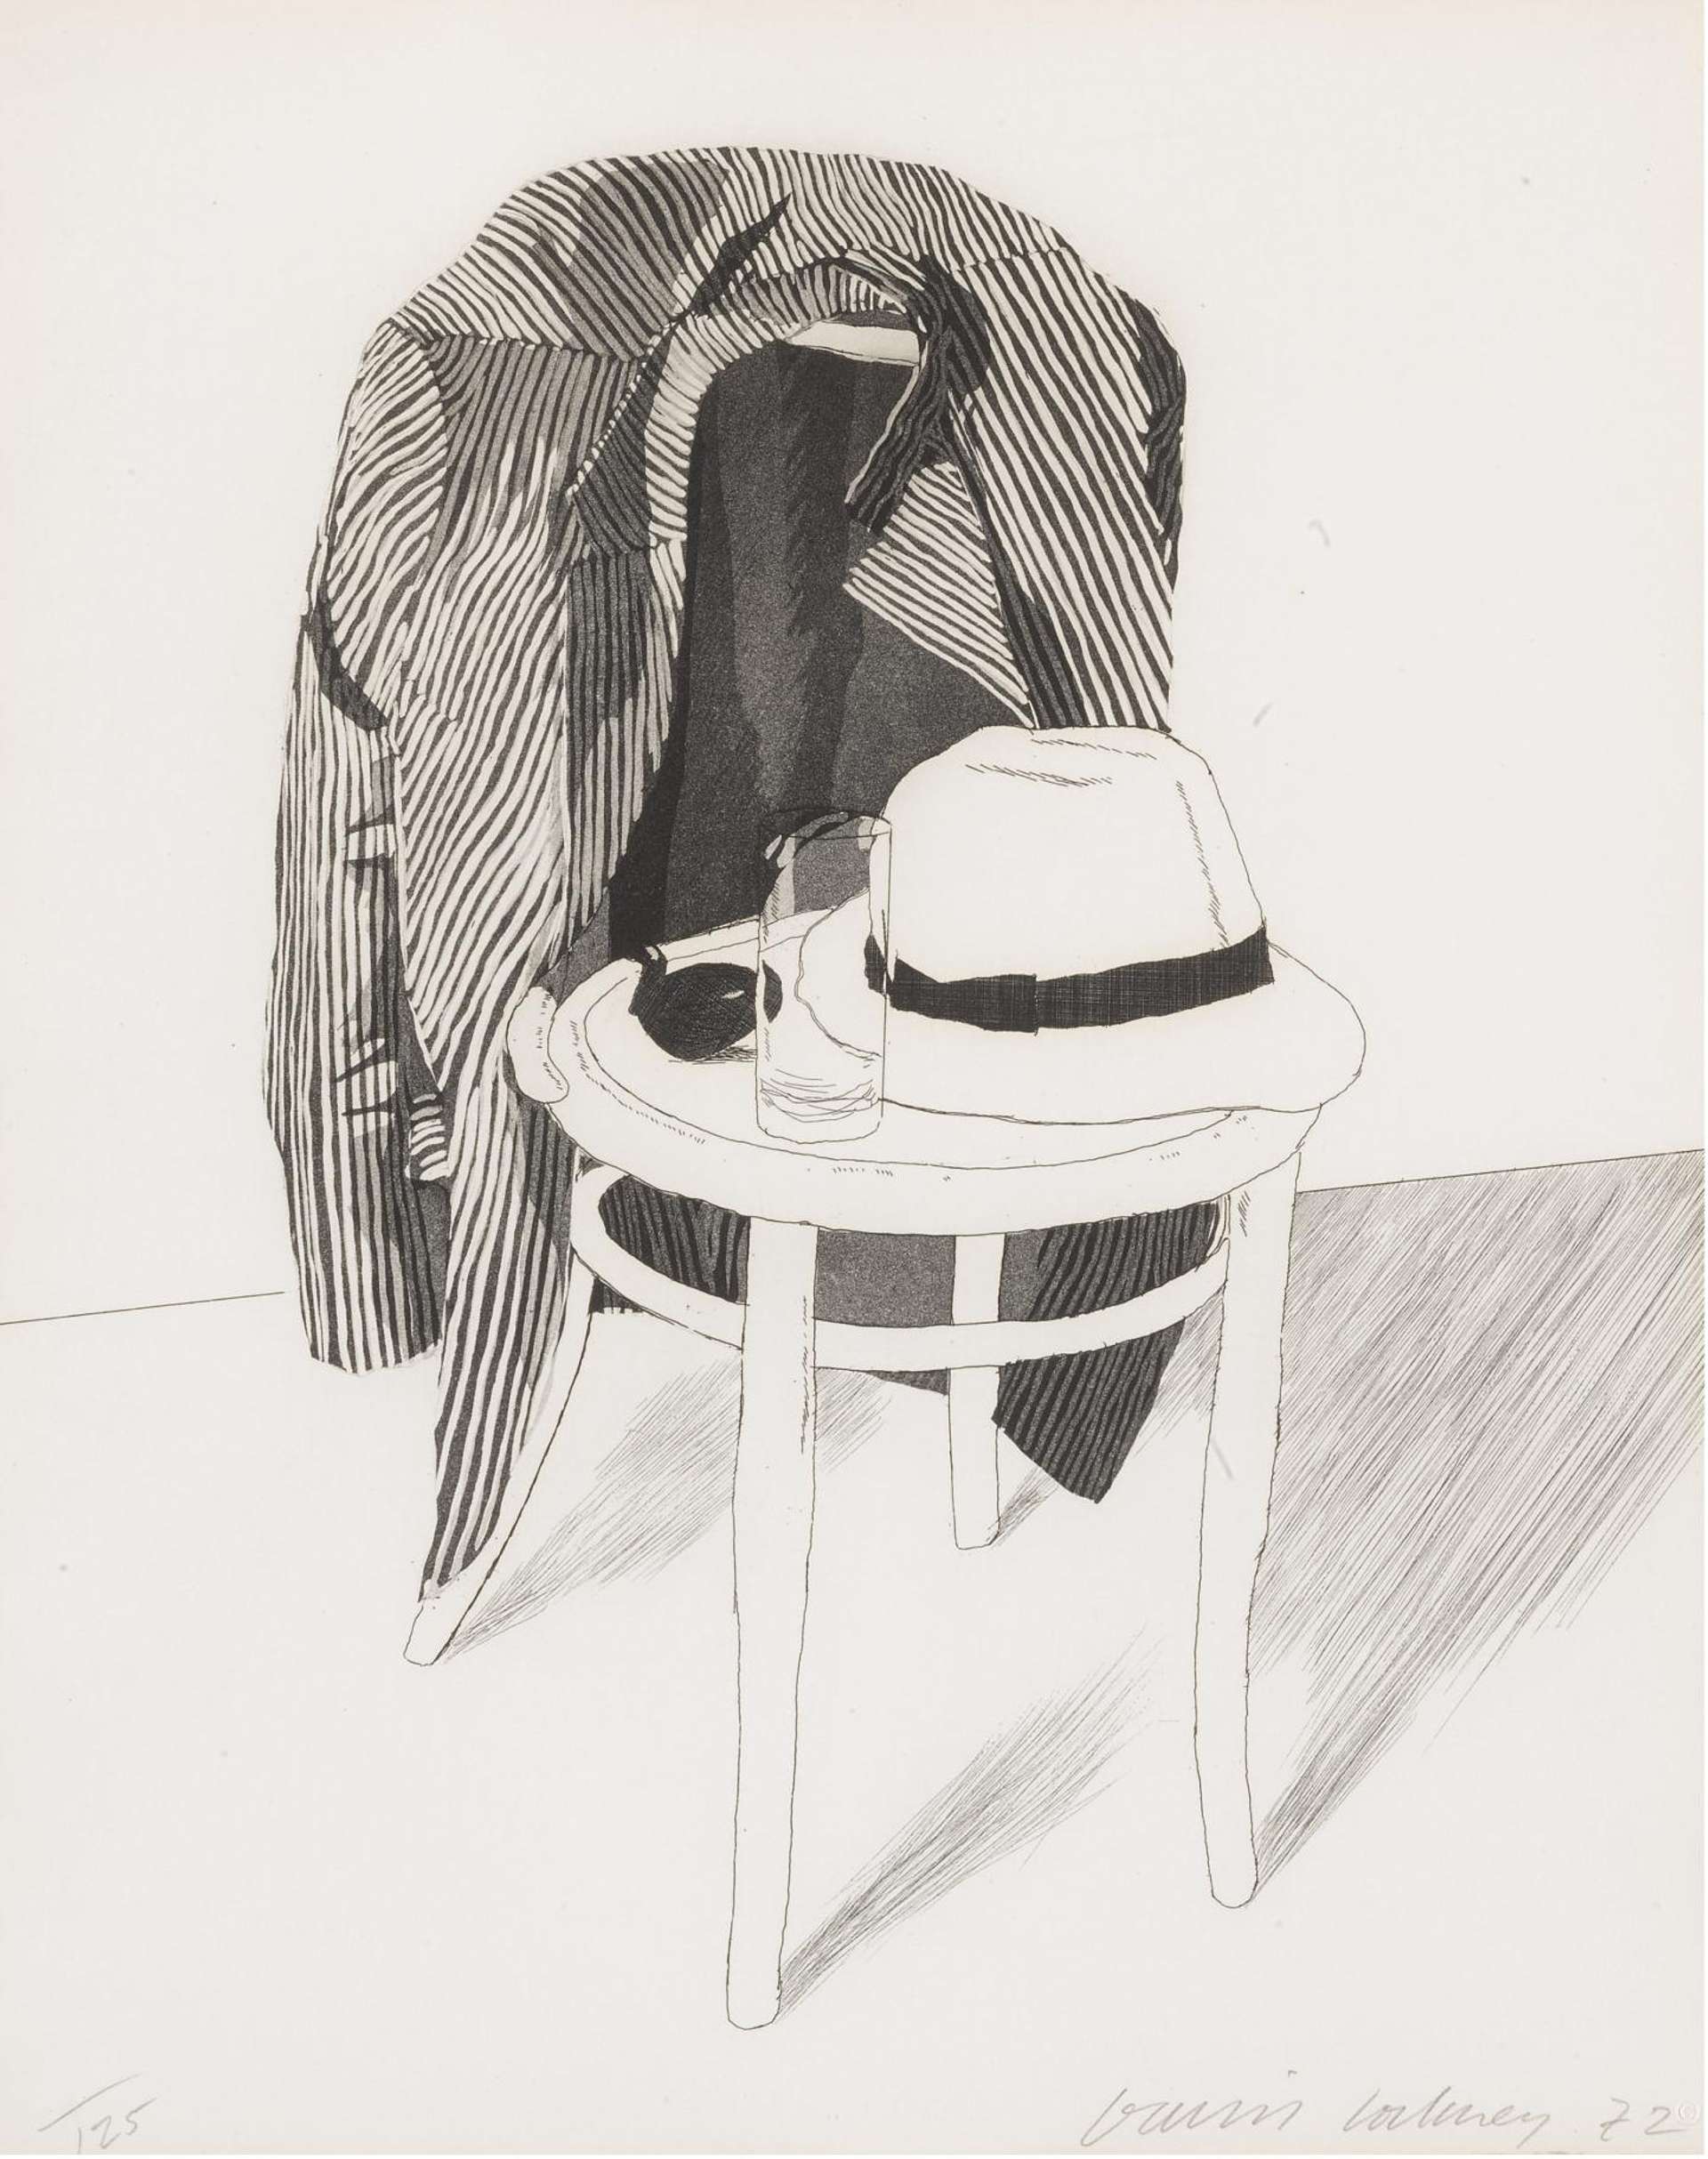 This monochrome print shows a jacket, a panama hat, an empty glass, and a pipe, all sat atop the ghostly suggestion of one of Hockney’s signature chairs